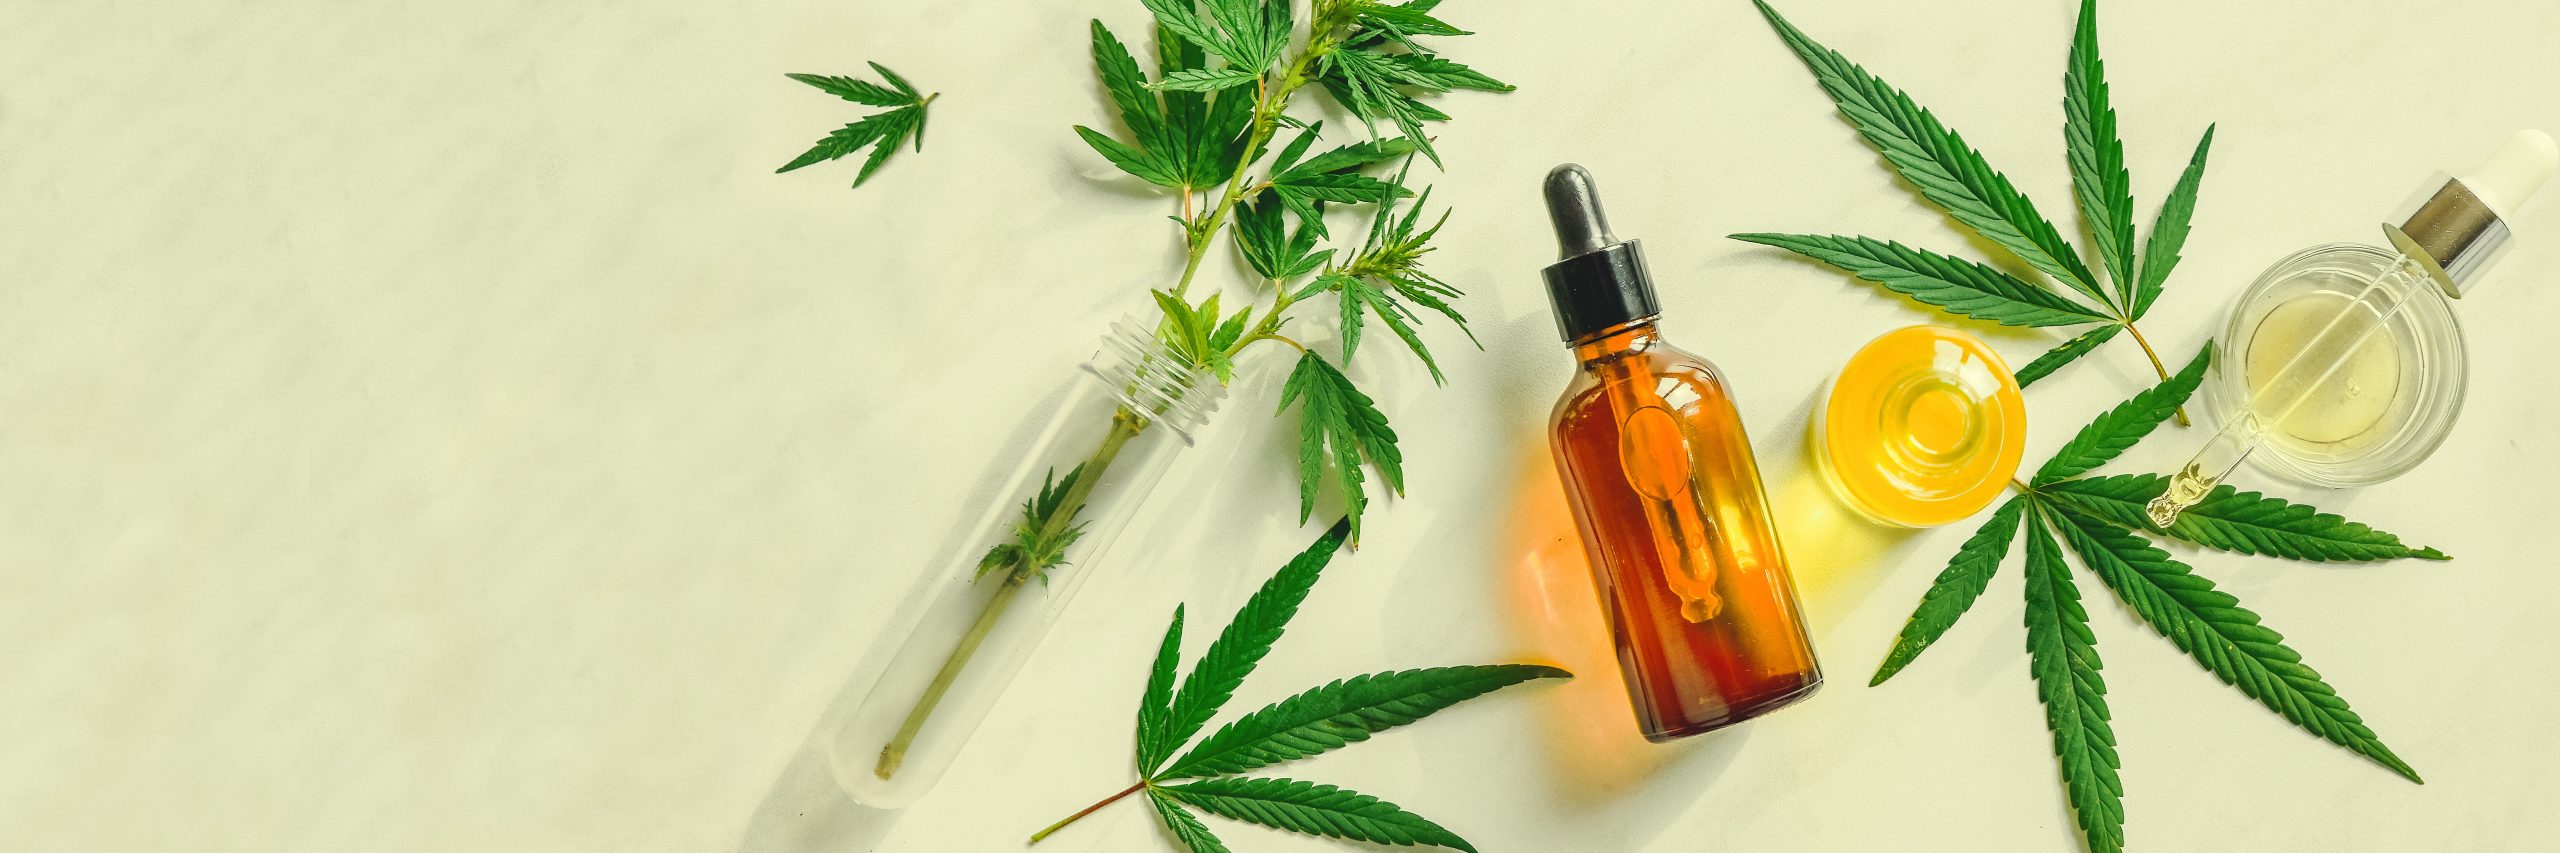 ALZHEIMER’S HOW CBD AND OTHER PRODUCTS CAN HELP